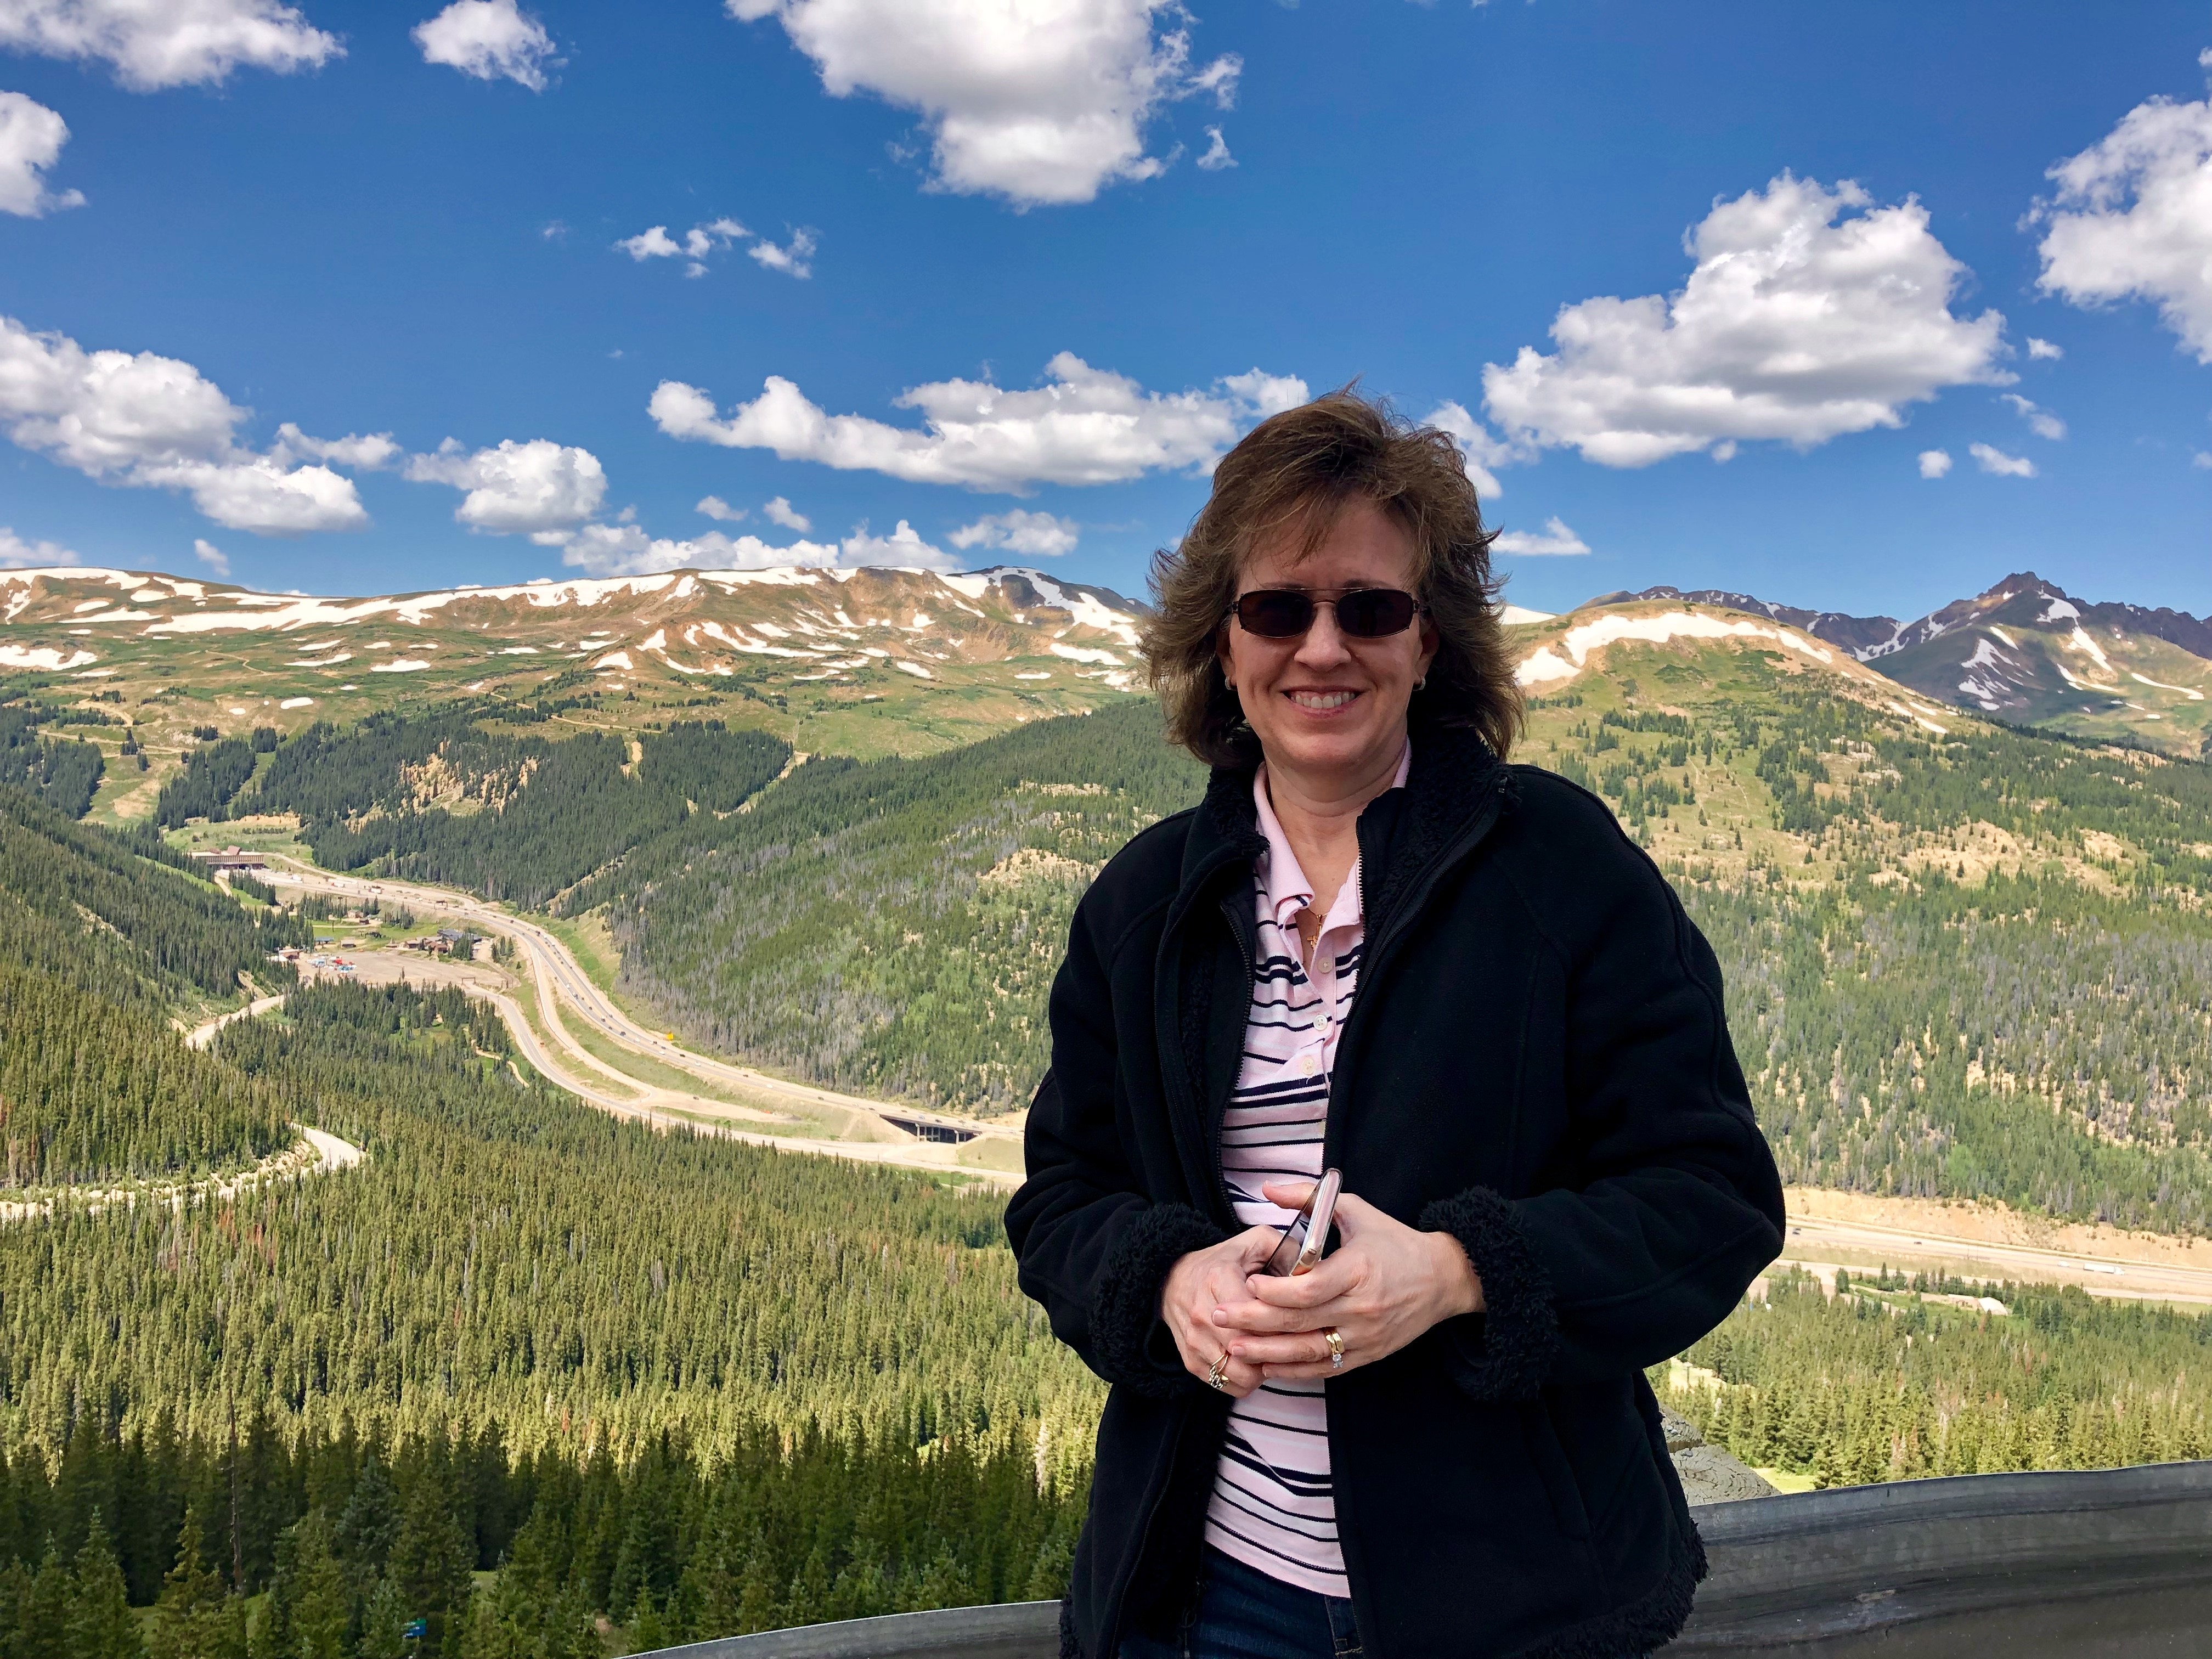 Kim Walliser is smiling at the camera with a mountain landscape in the background.